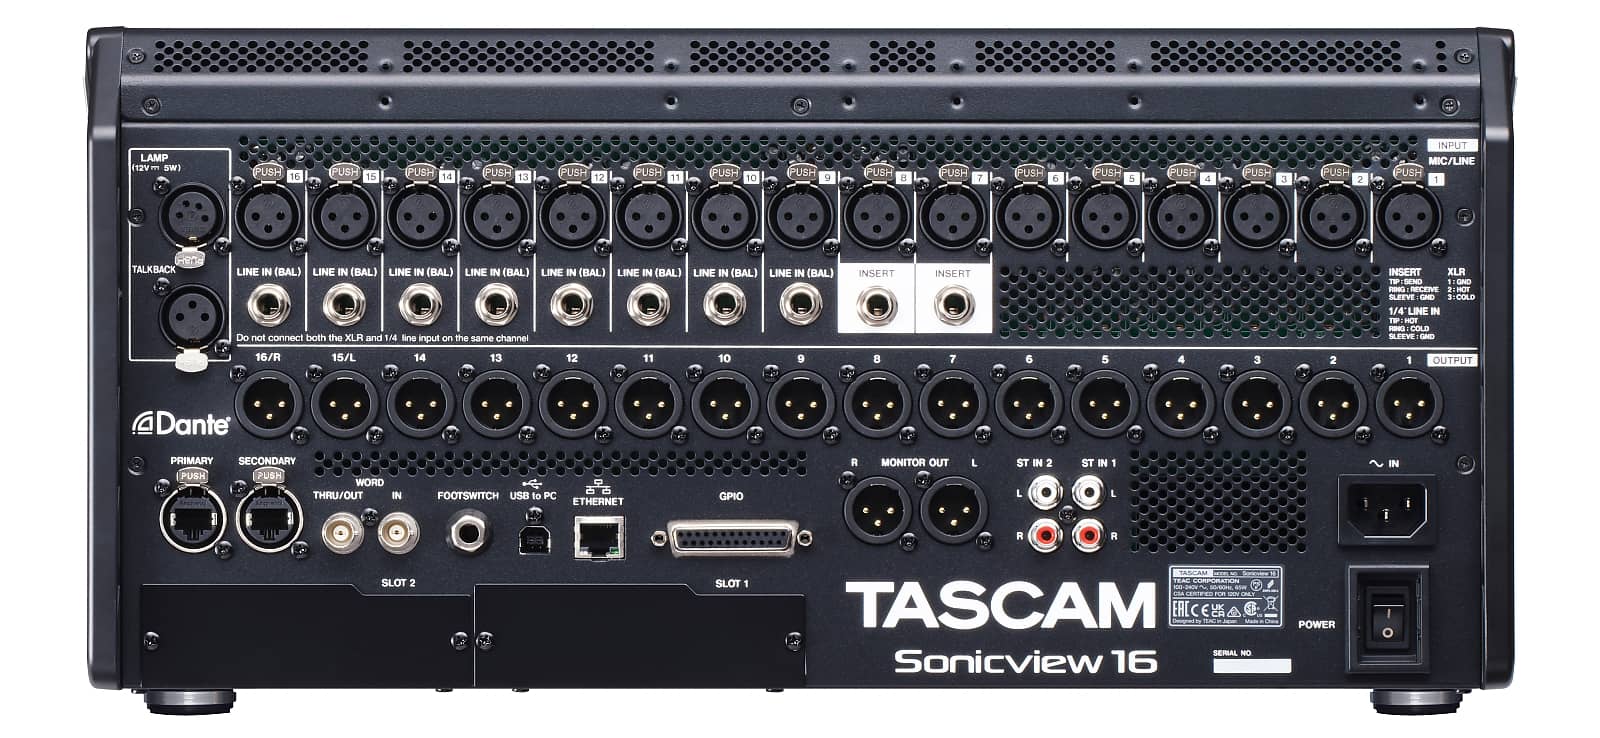 Rear view | Tascam Sonicview 16